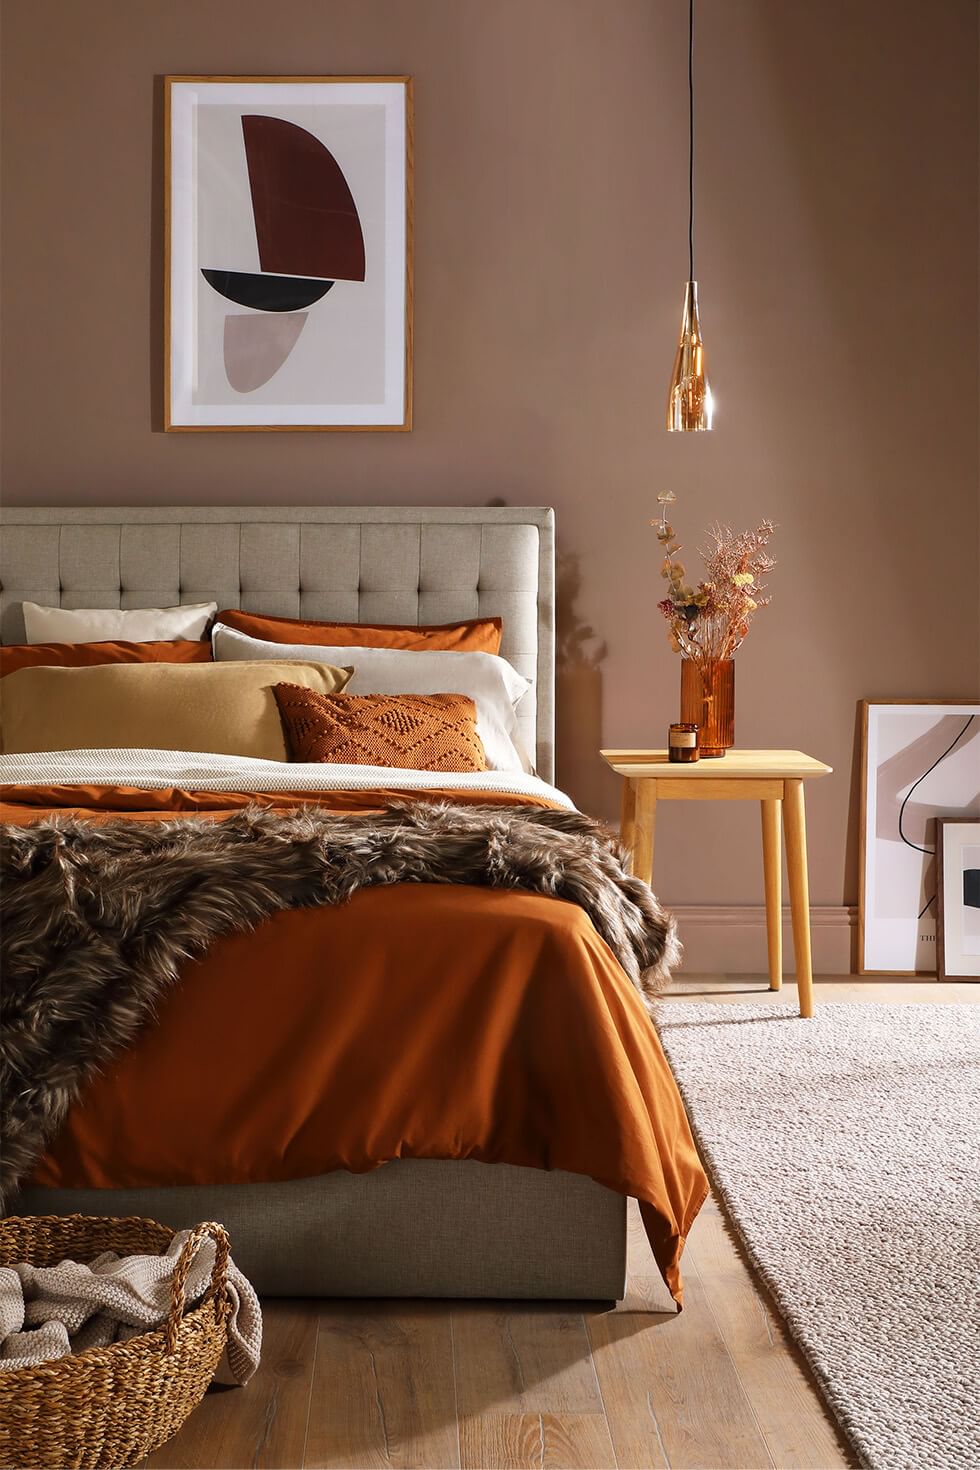 Comfy bed with multiple pillows and a faux fur throw